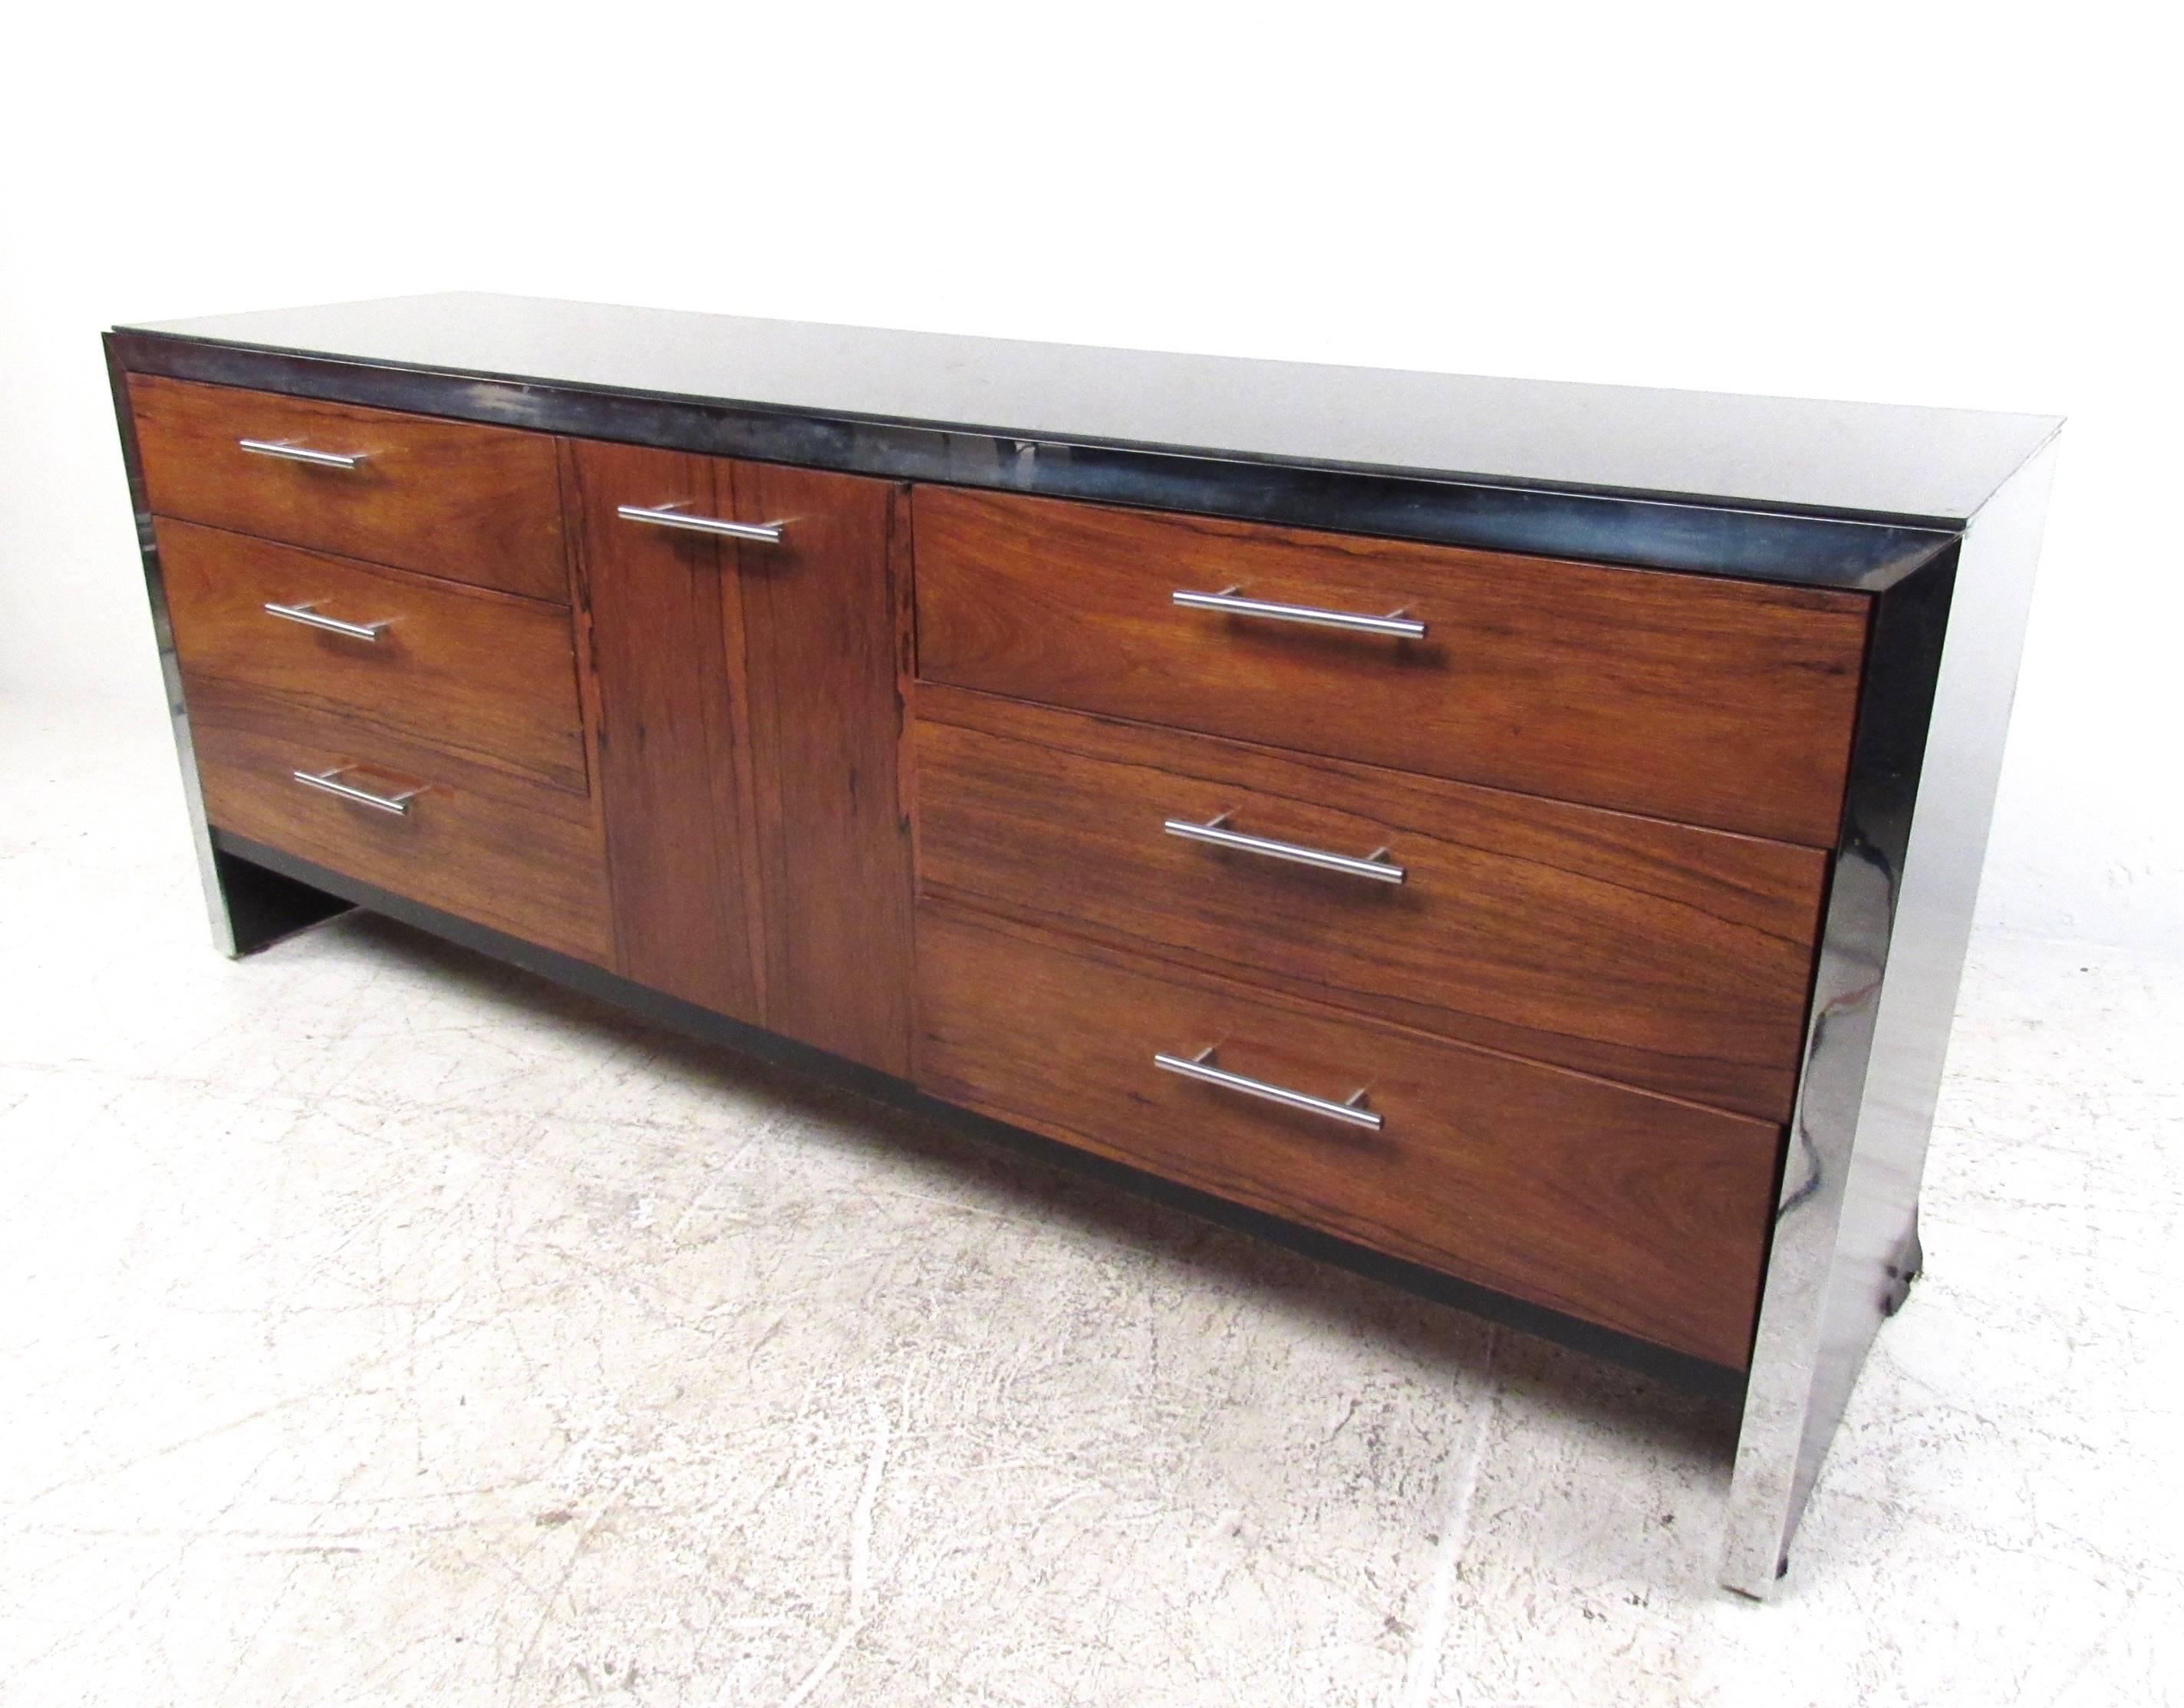 This stunning vintage dresser features stunning veneer front, chrome trim, and black glass top. Exquisite mid-century modern storage piece perfect for bedroom or other interior setting, this piece features the design of Milo Baughman as produced for